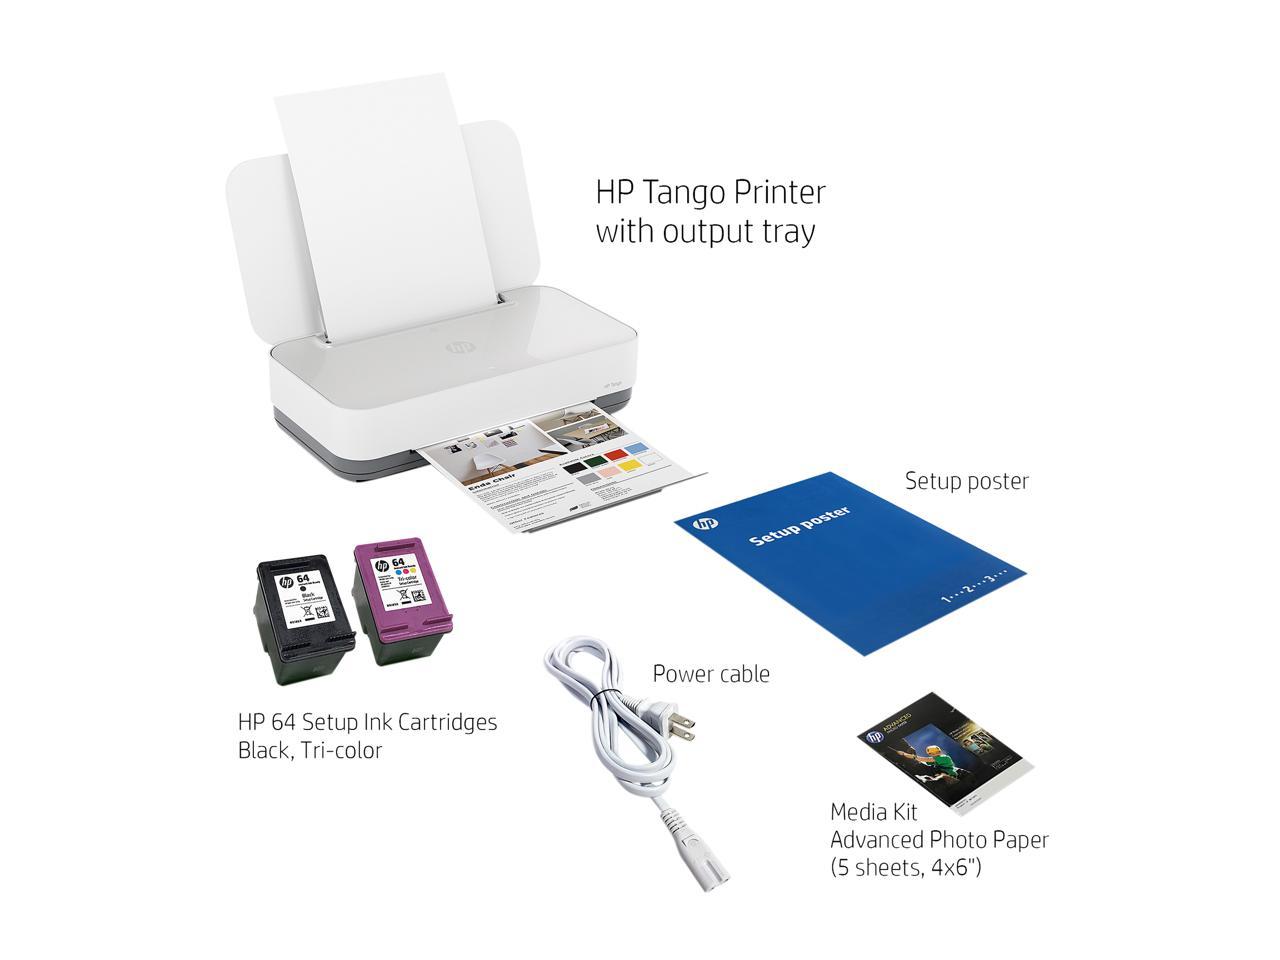 Tango Smart Home Printer – Designed for your Smartphone with Remote Wireless Printing, Instant Ink Ready and works with Alexa/Google (2RY54A) - Newegg.com